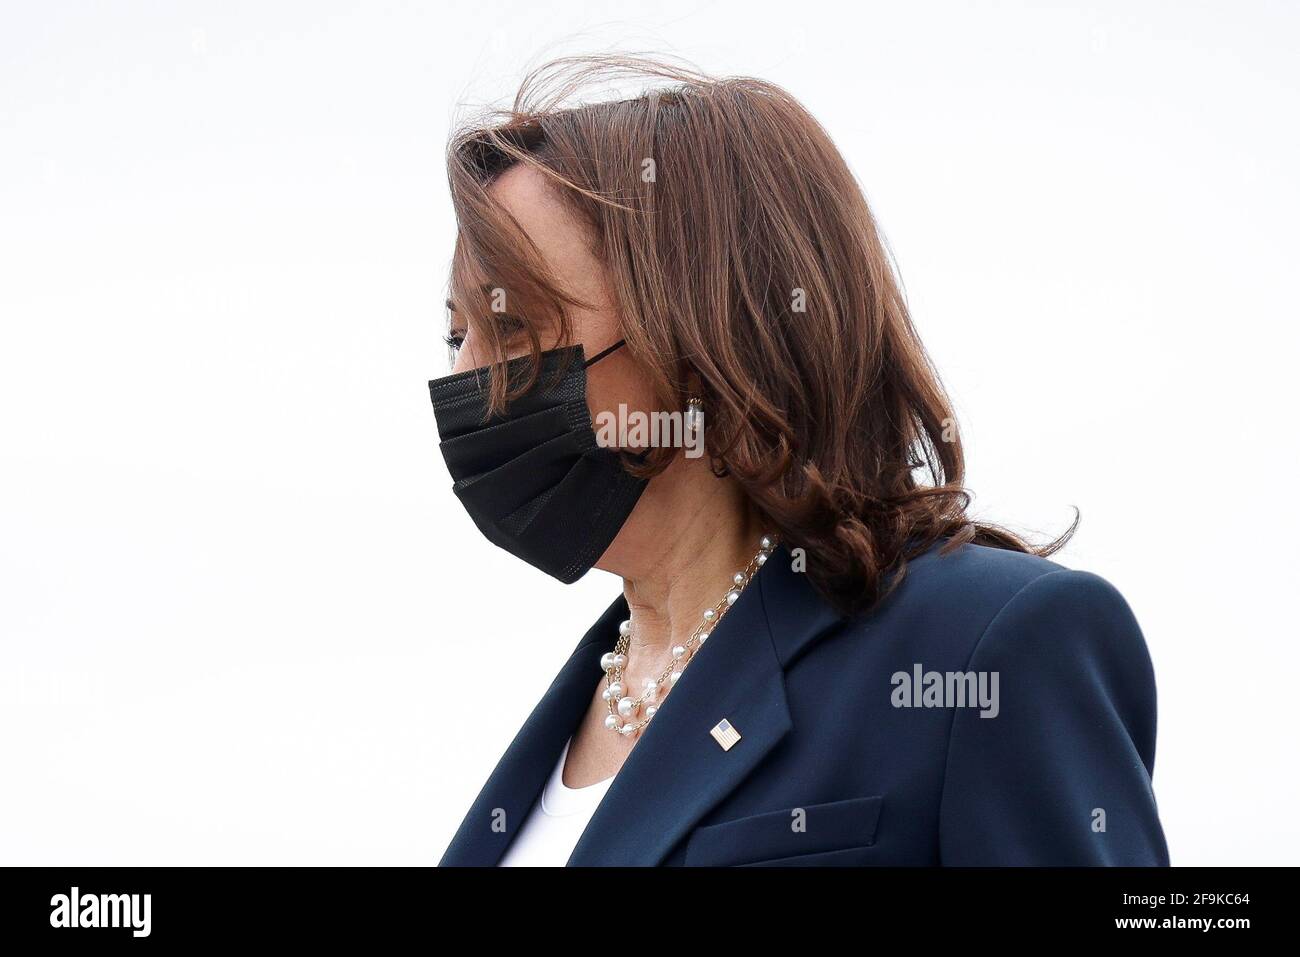 U.S. Vice President Kamala Harris descends from Air Force Two at Piedmont Triad International Airport in Greensboro, North Carolina, U.S. April 19, 2021. REUTERS/Tom Brenner Stock Photo